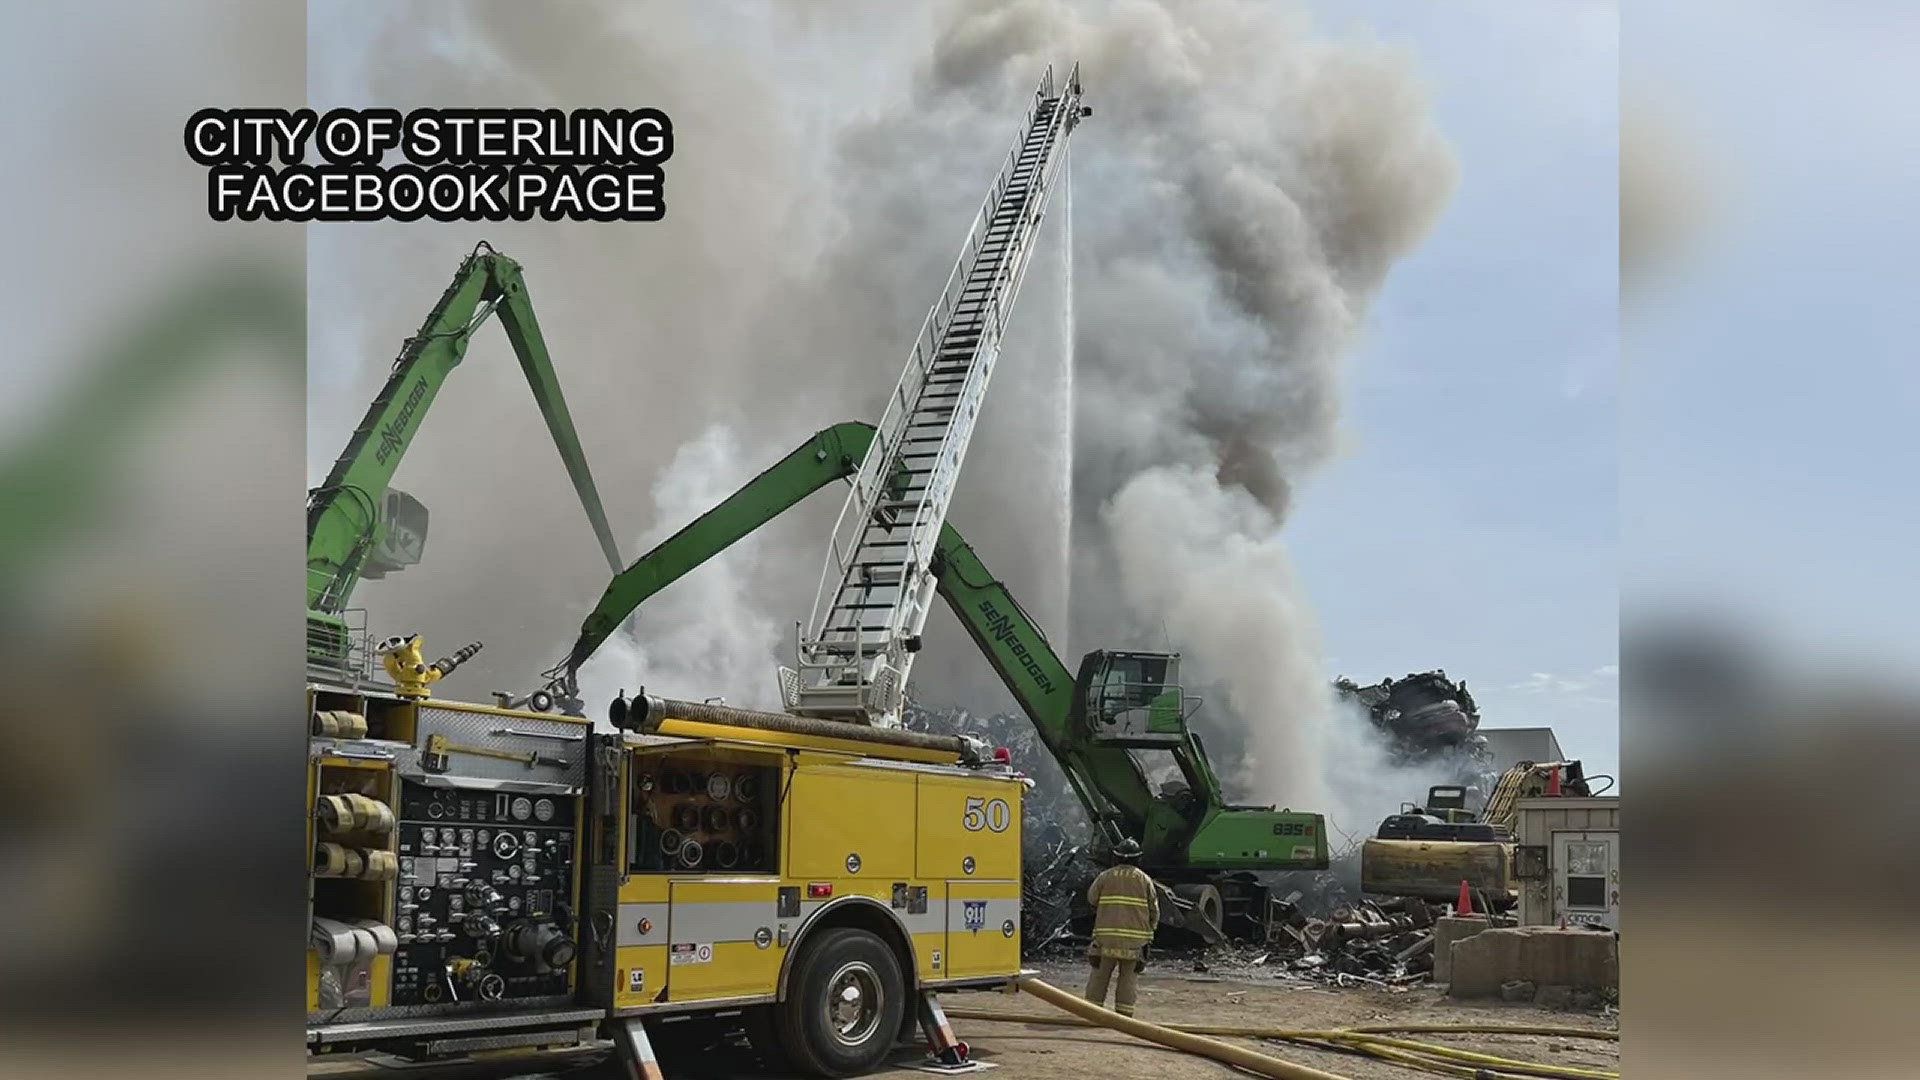 An outdoor pile of crushed and shredded materials had caught fire, according to officials.